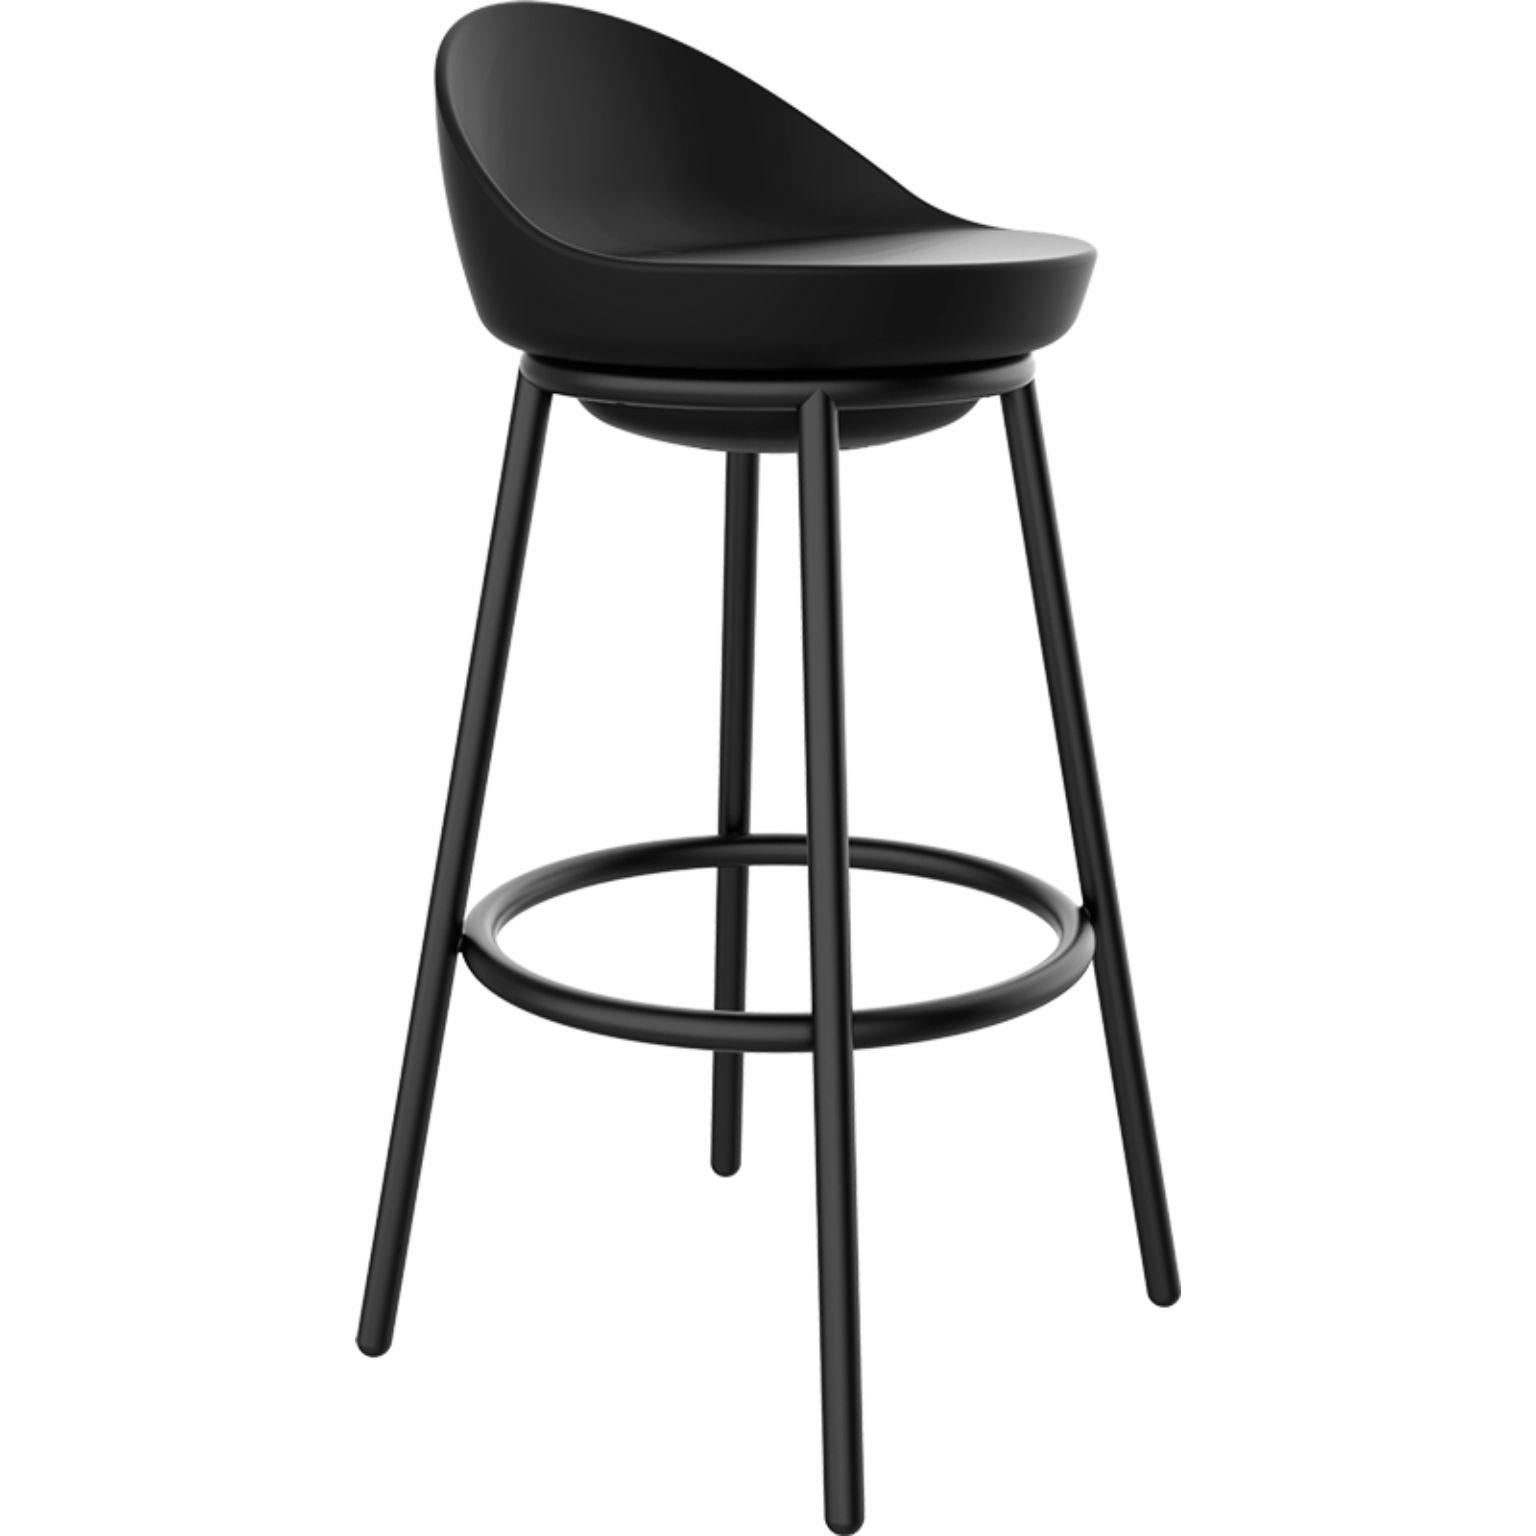 Lace black stool by MOWEE.
Dimensions: D43 x H91 cm.
Material: polyethylene, stainless steel.
Weight: 6.7 kg
Also available in different colours and finishes. 

Lace is a collection of furniture made by rotomoulding. Its shape resembles a